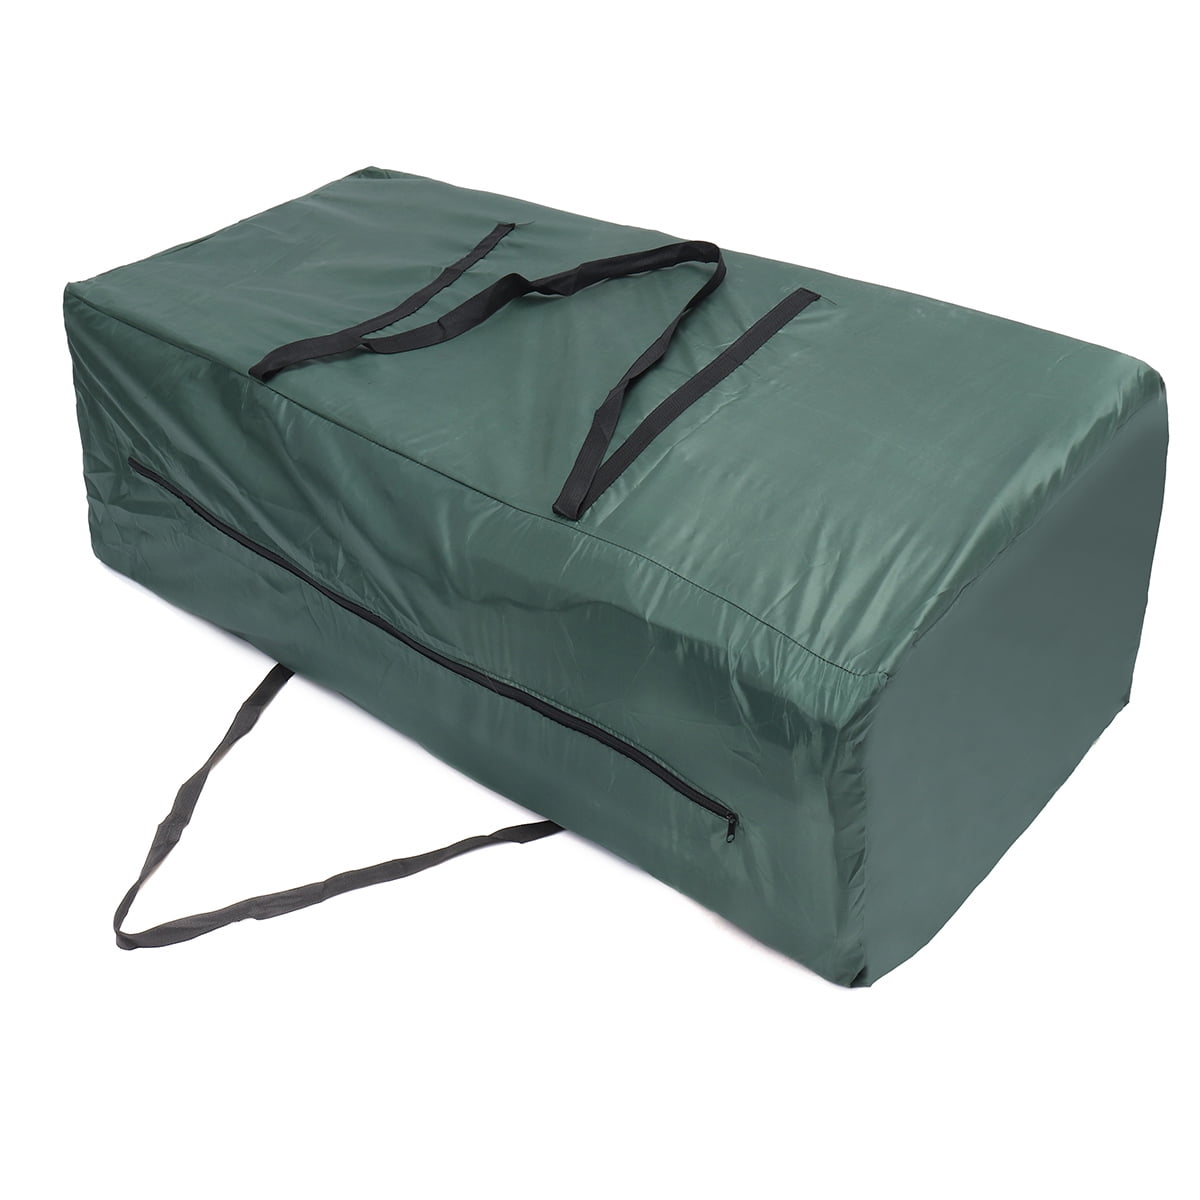 Heavy Duty Patio Cushion Durable and Water Resistant Oversized Patio ...